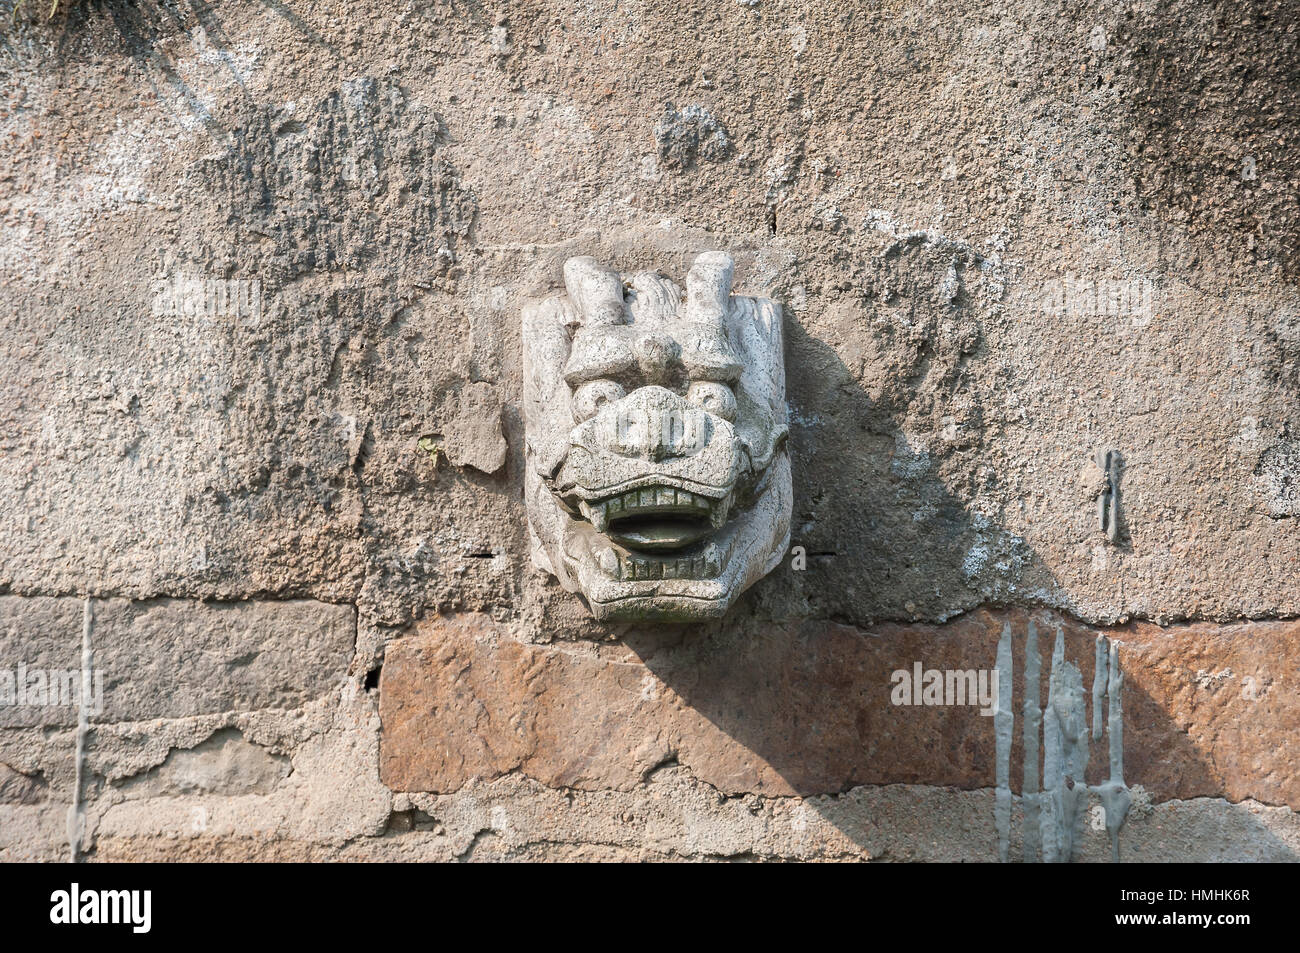 Stone dragon head water spout on a Suzhou canal, China Stock Photo